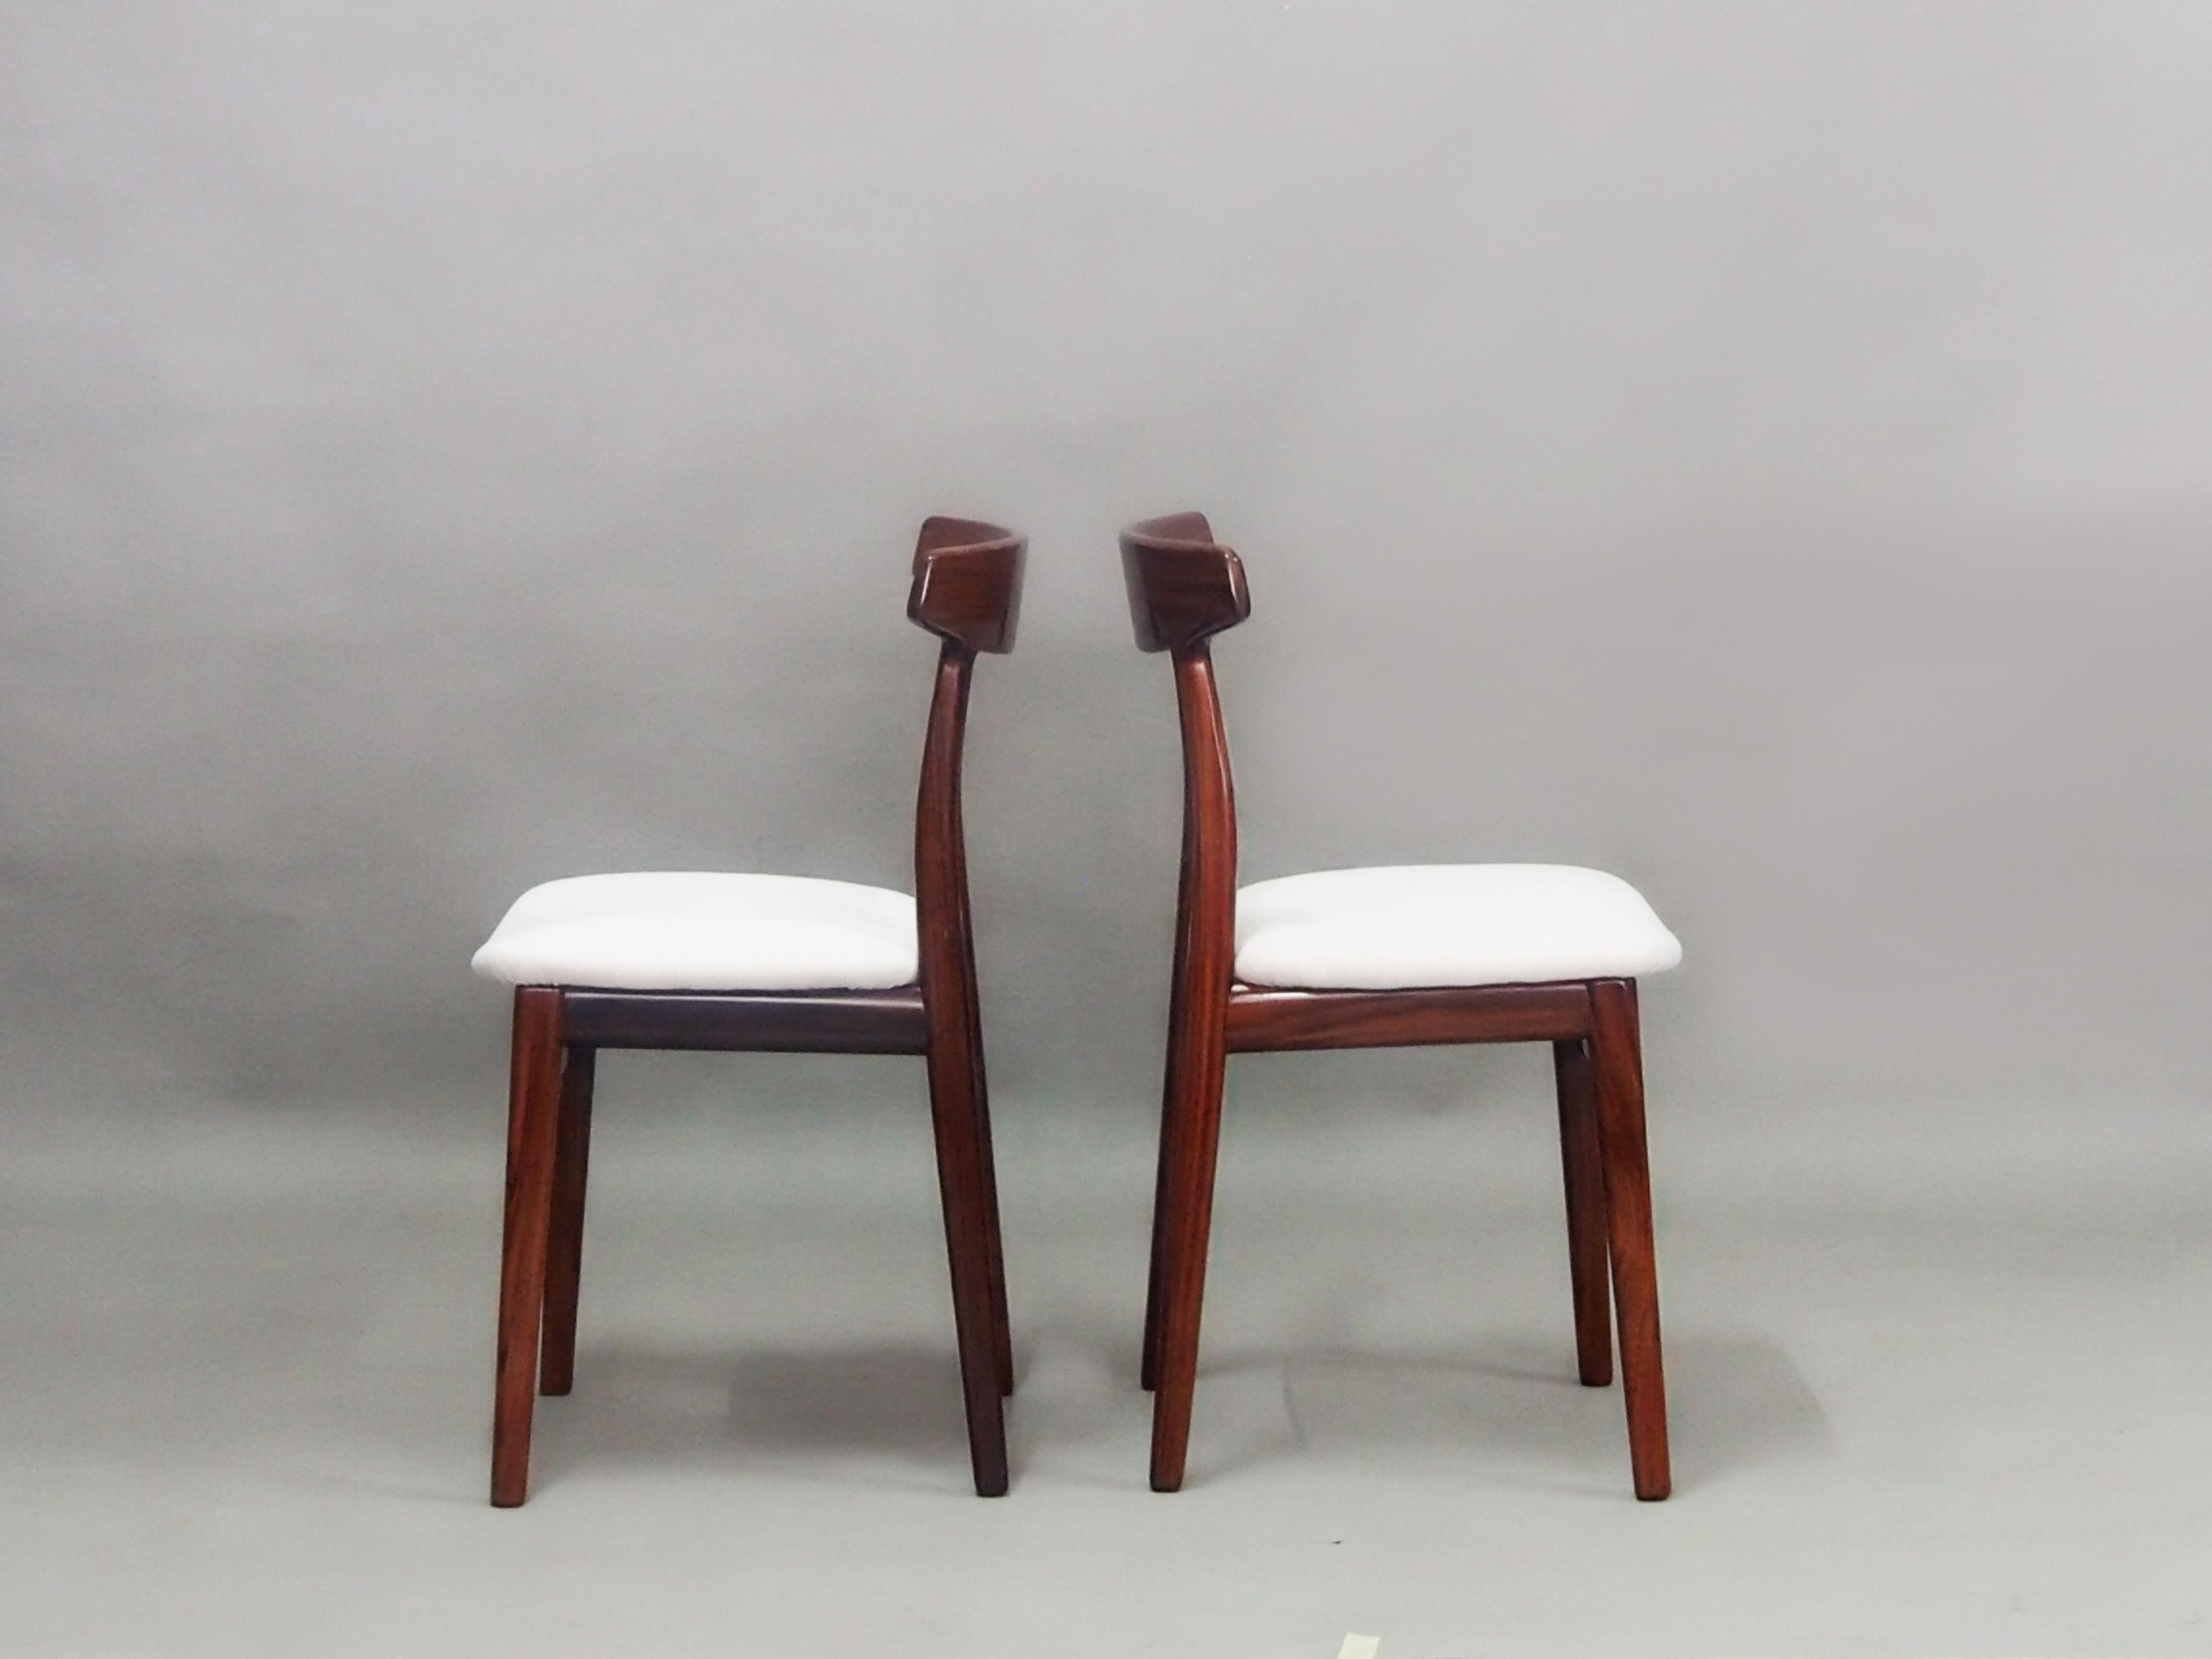 Set of six Henry Kjaernulf rosewood dining chairs model 60 produced by Bruno Hansen.